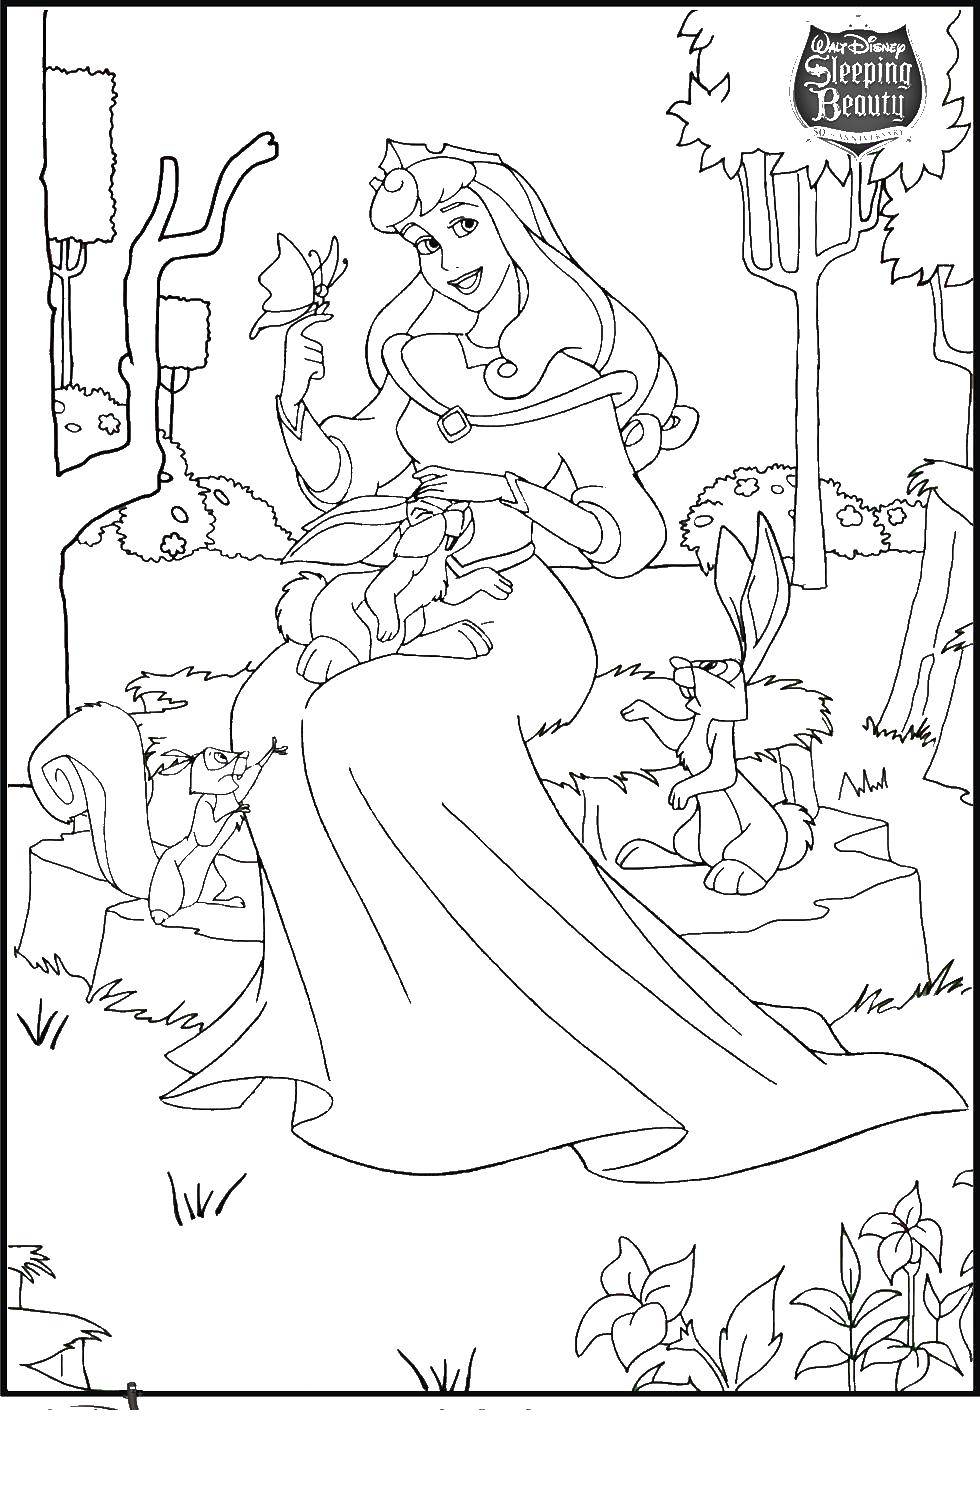 Coloring Princess Aurora with animals. Category Disney coloring pages. Tags:  Aurora, Princess.